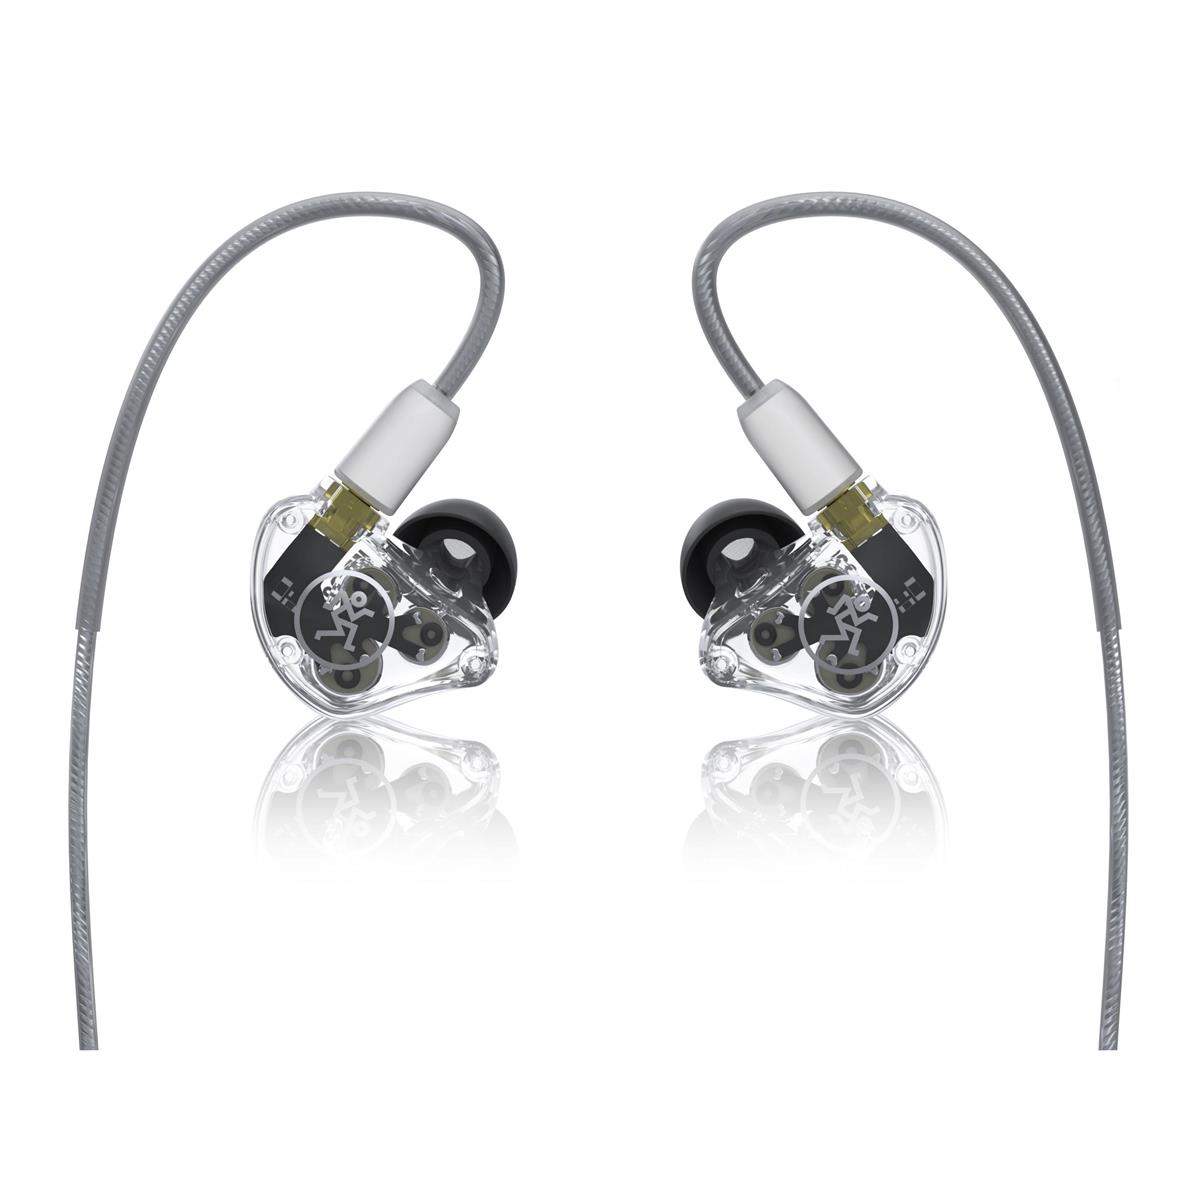 Image of Mackie MP-320 Triple Dynamic Driver Professional In-Ear Monitors